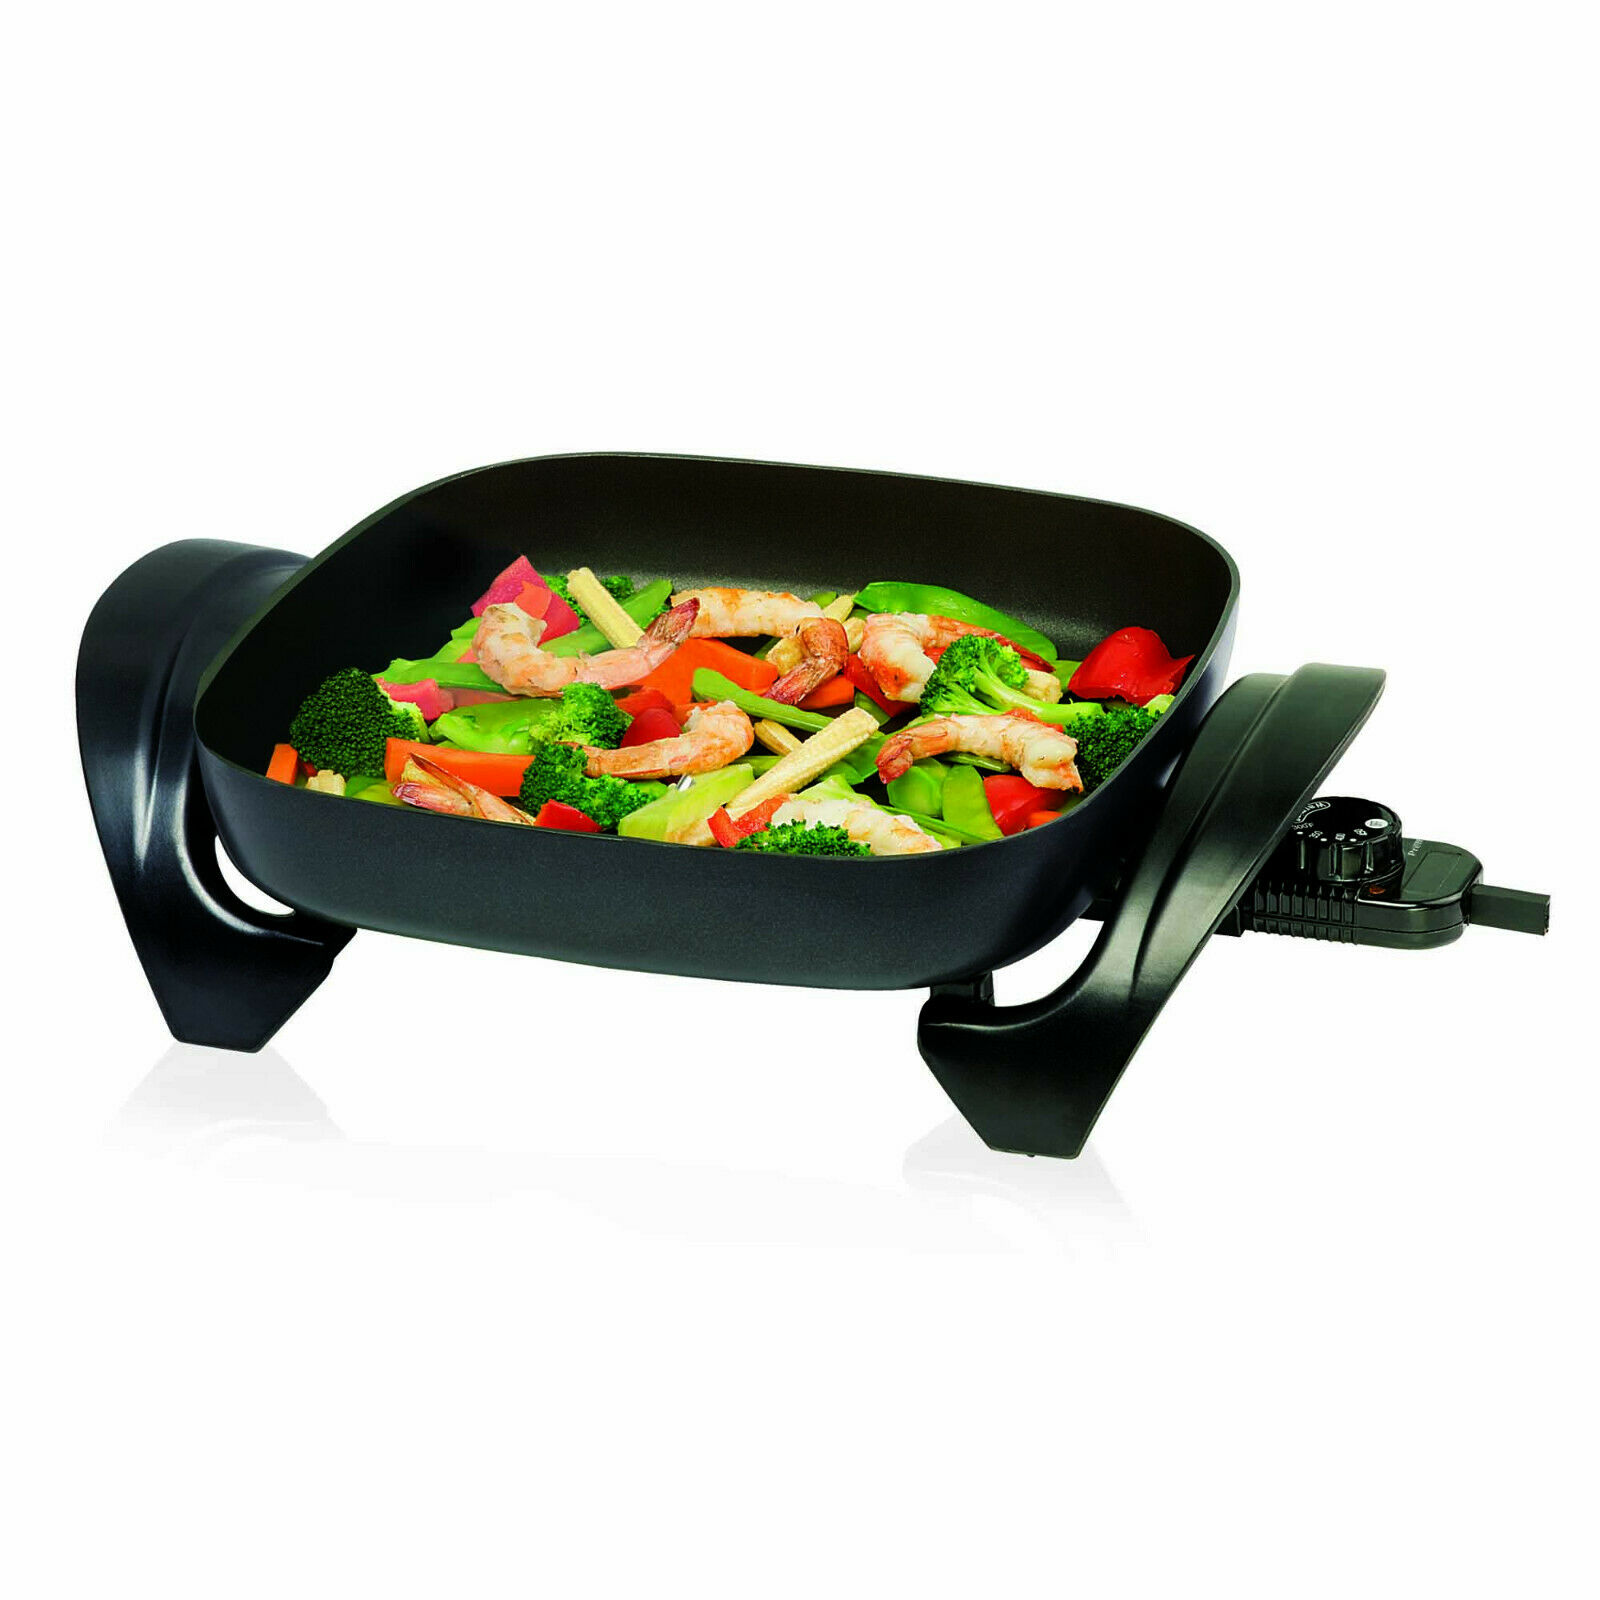 Premium -1200 W 12 inch Electric Skillet Non-Stick Coating High Domed Glass Lid - image 2 of 8